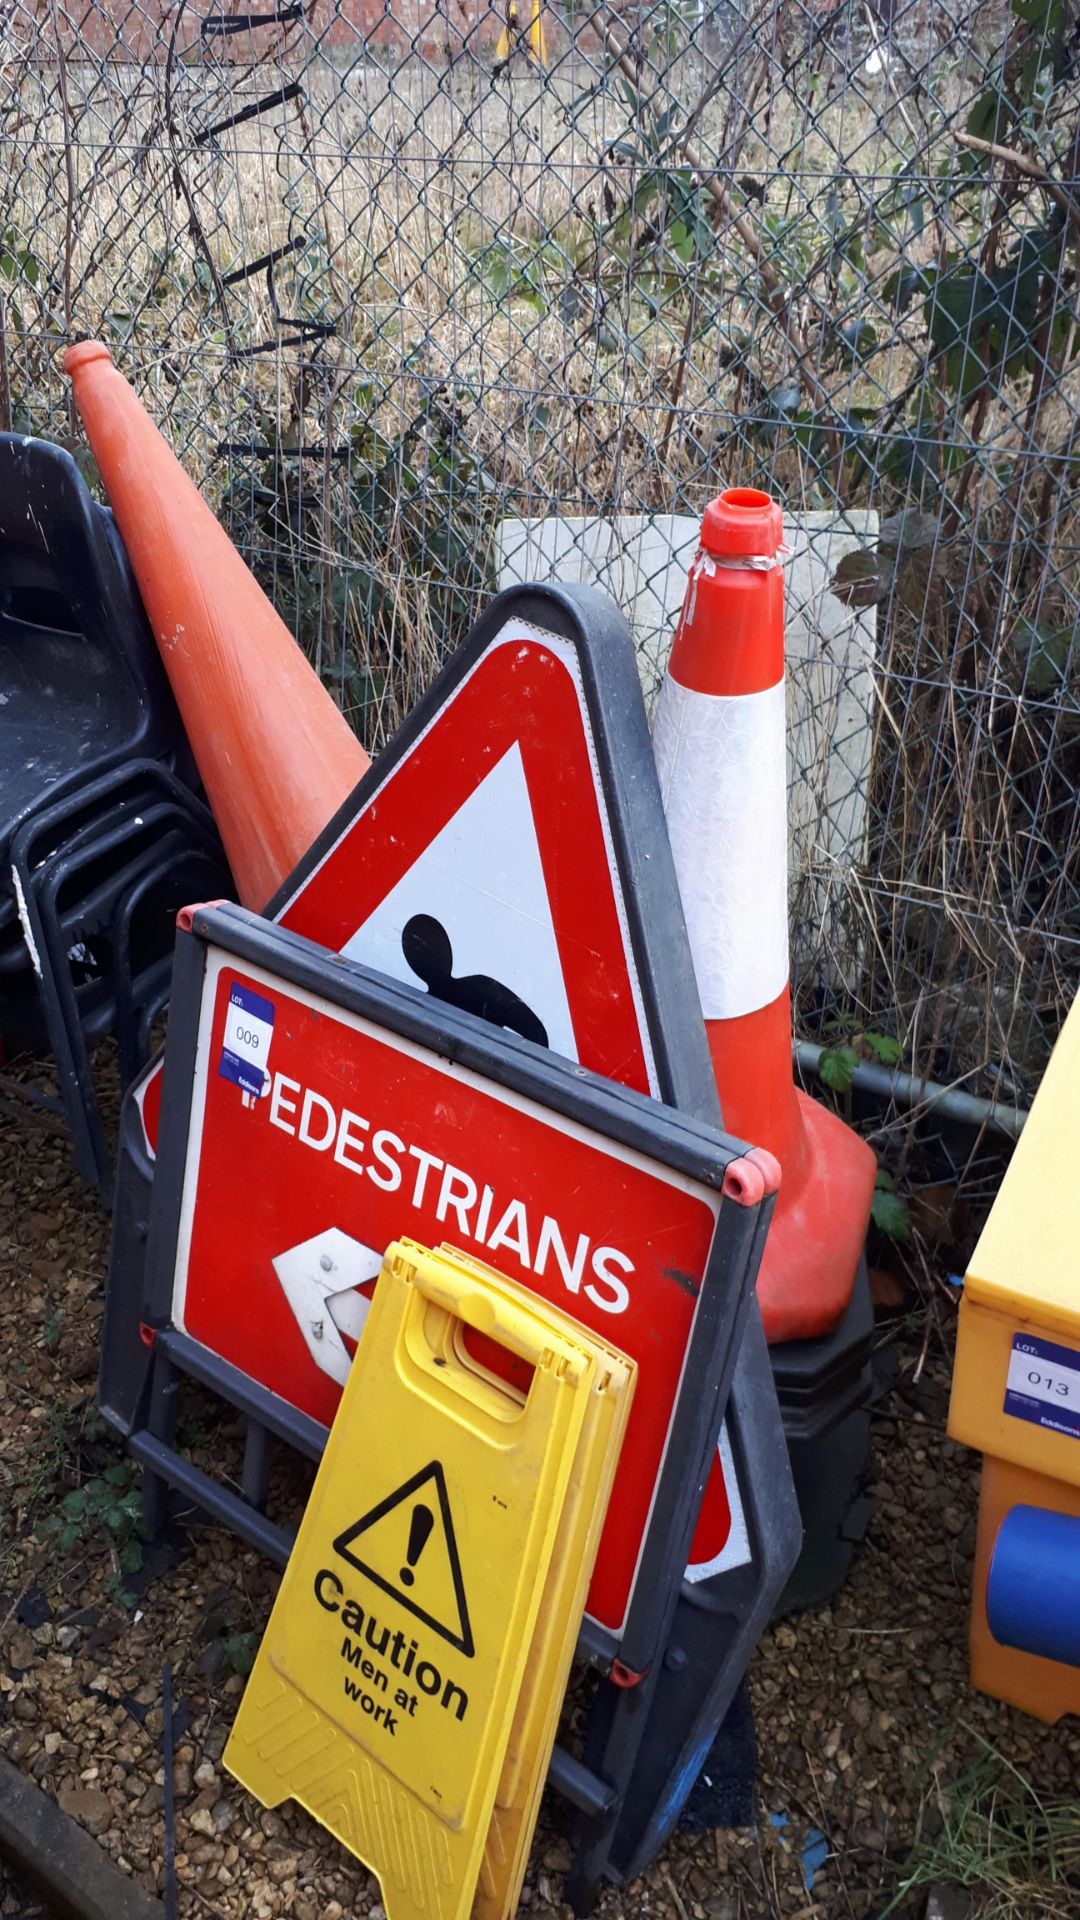 Various traffic cones, and warning signs